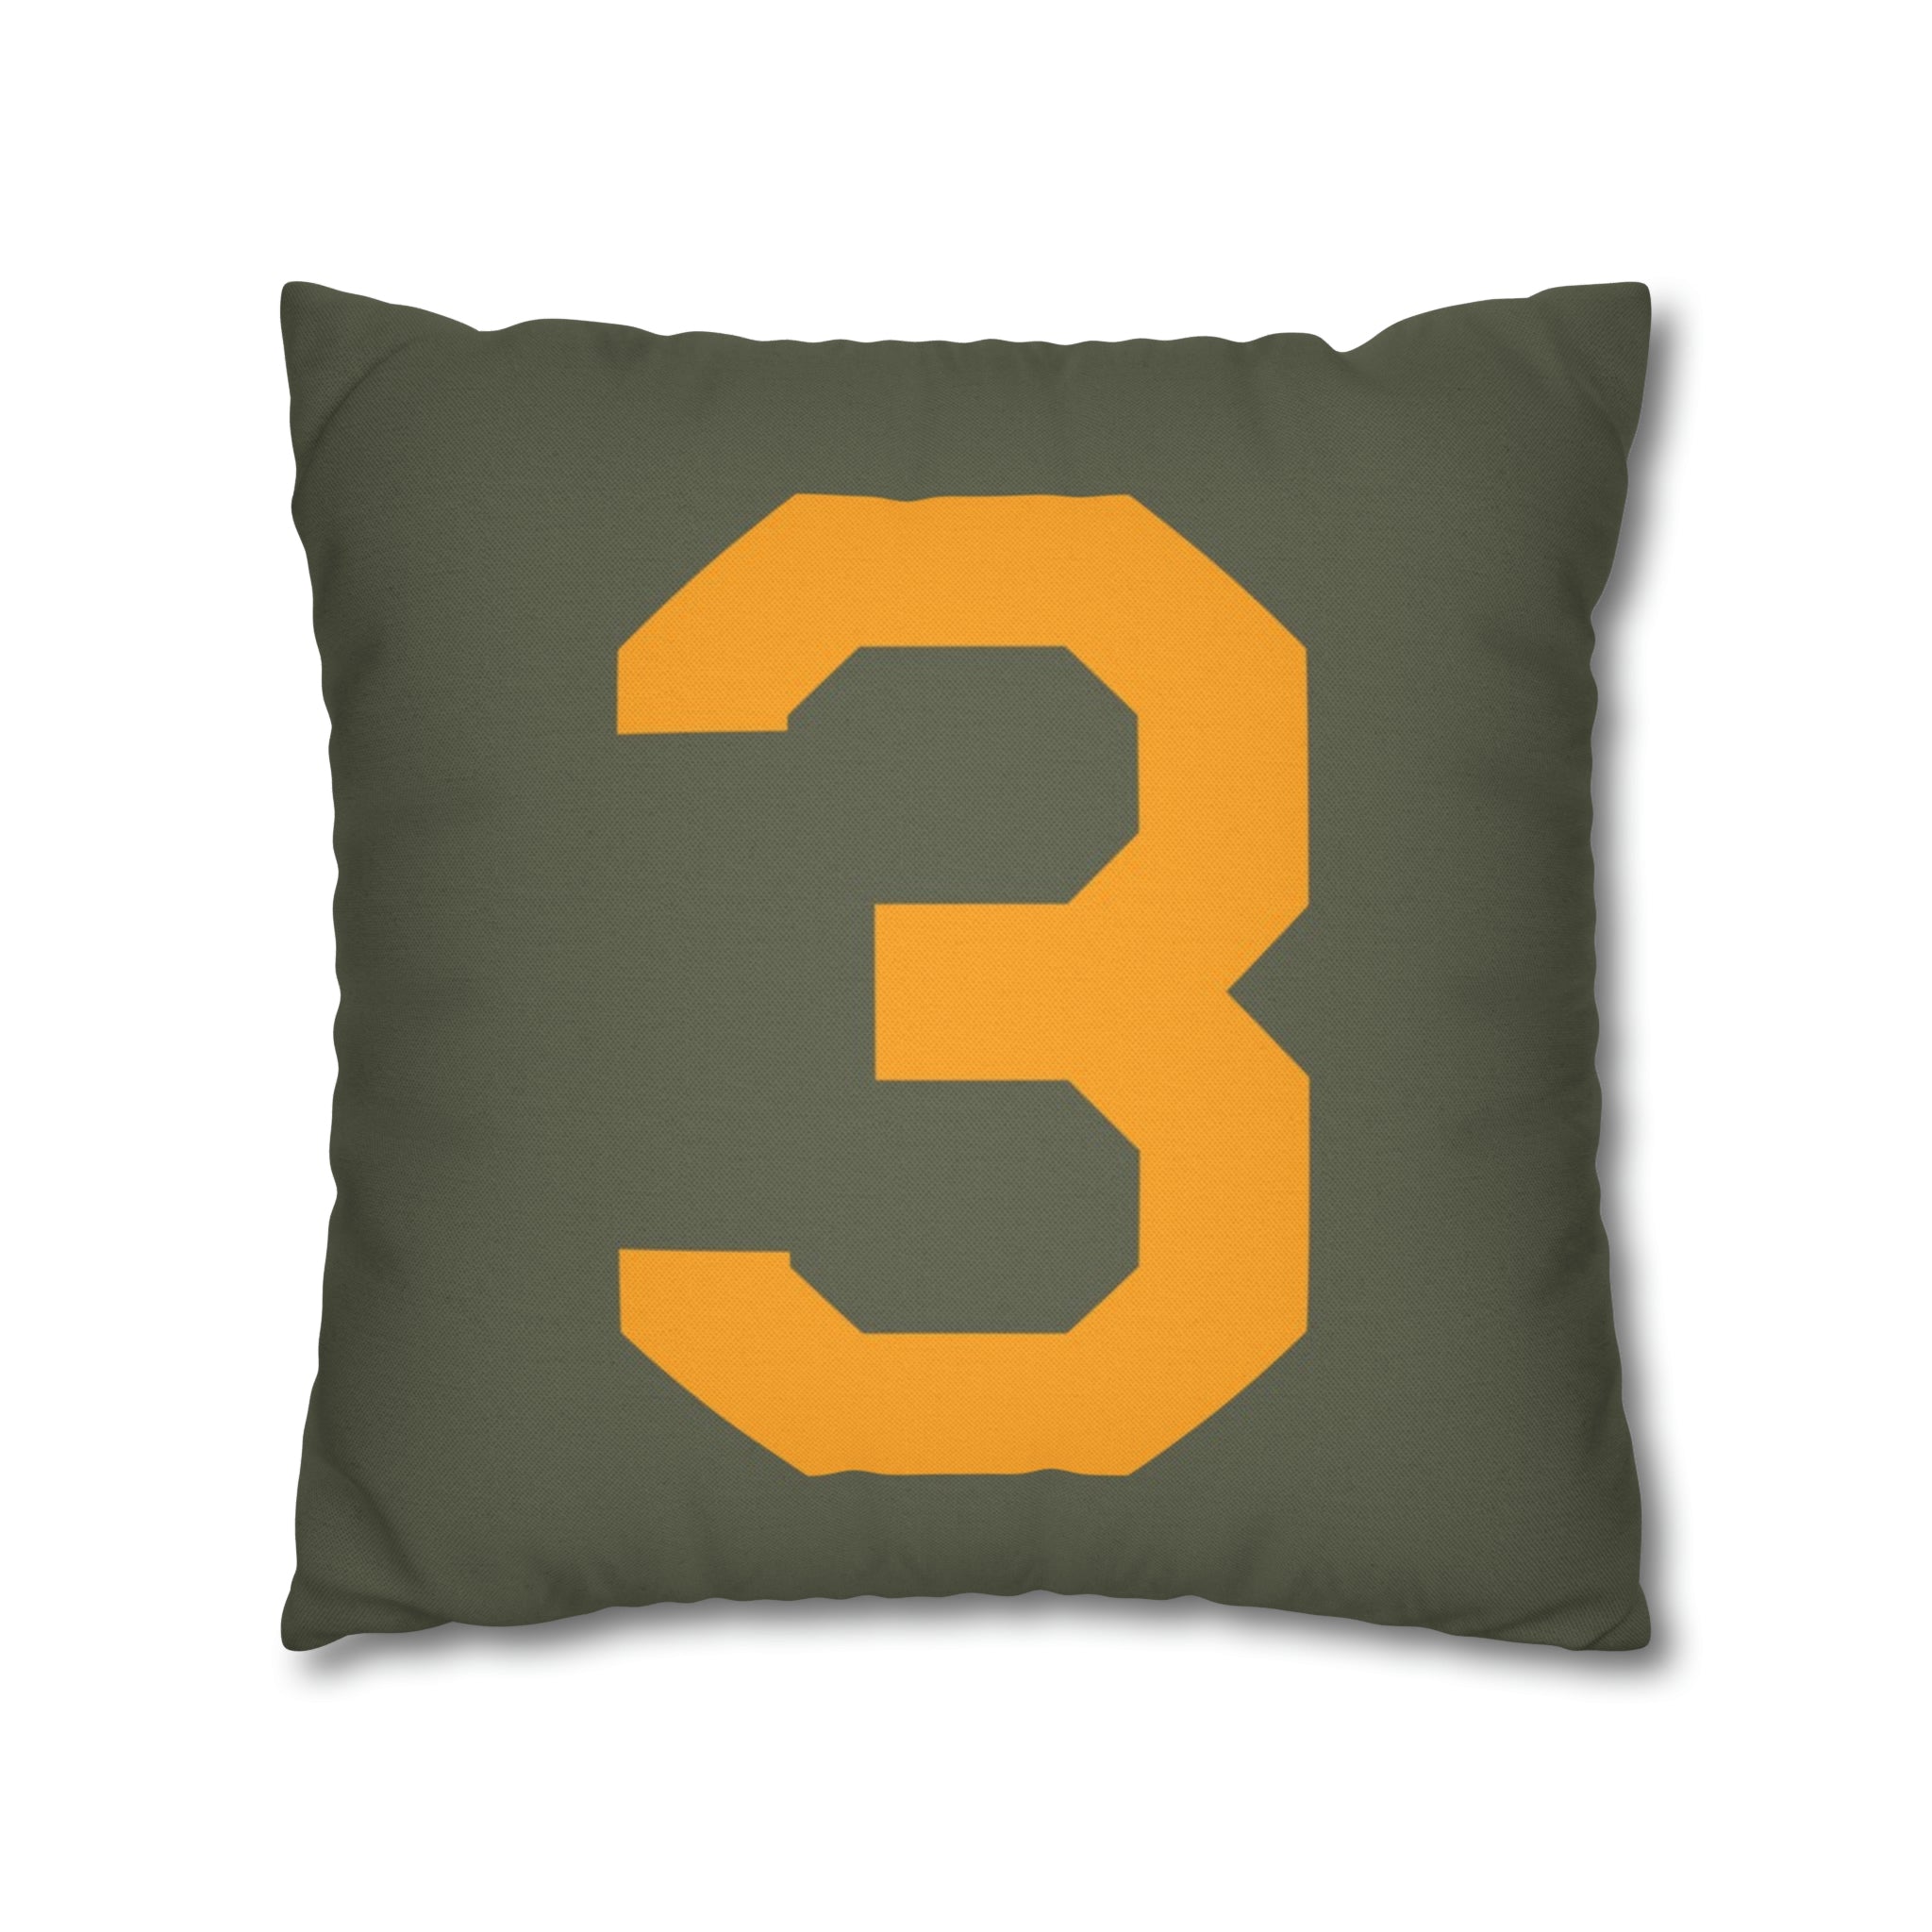 WWII USAAF Number "3" Square Pillowcase - I Love a Hangar